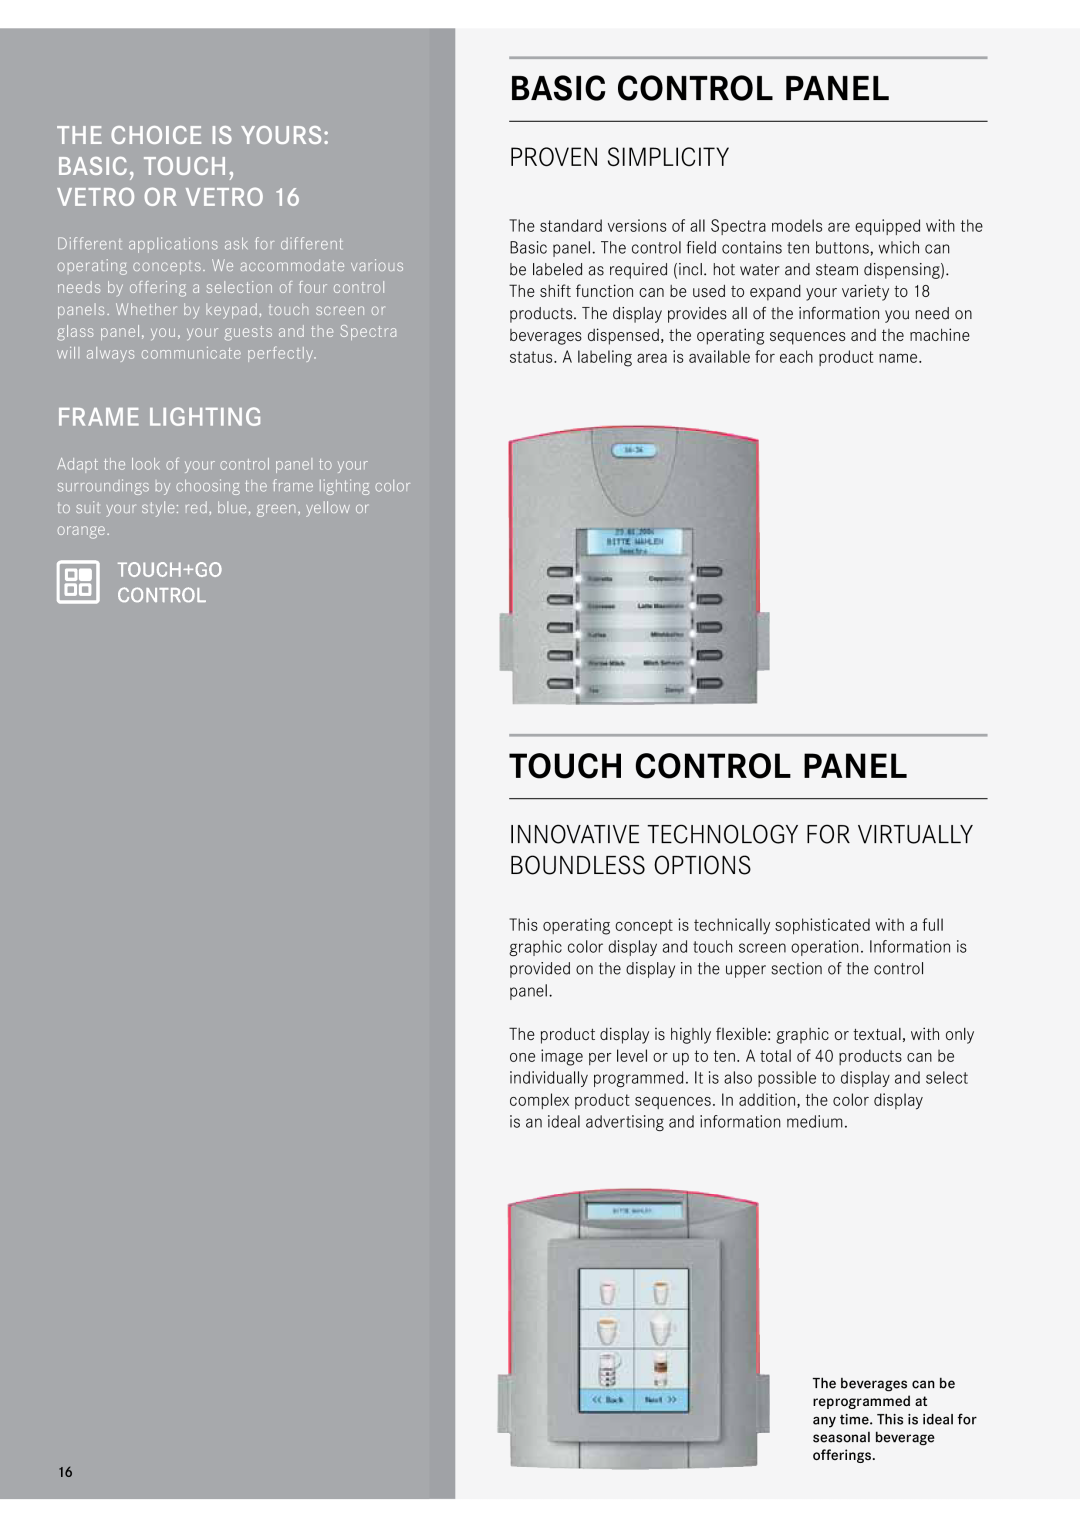 Franke Consumer Products 471086A1 manual Basic Control Panel, Touch Control Panel, The choice is yours, Frame Lighting 